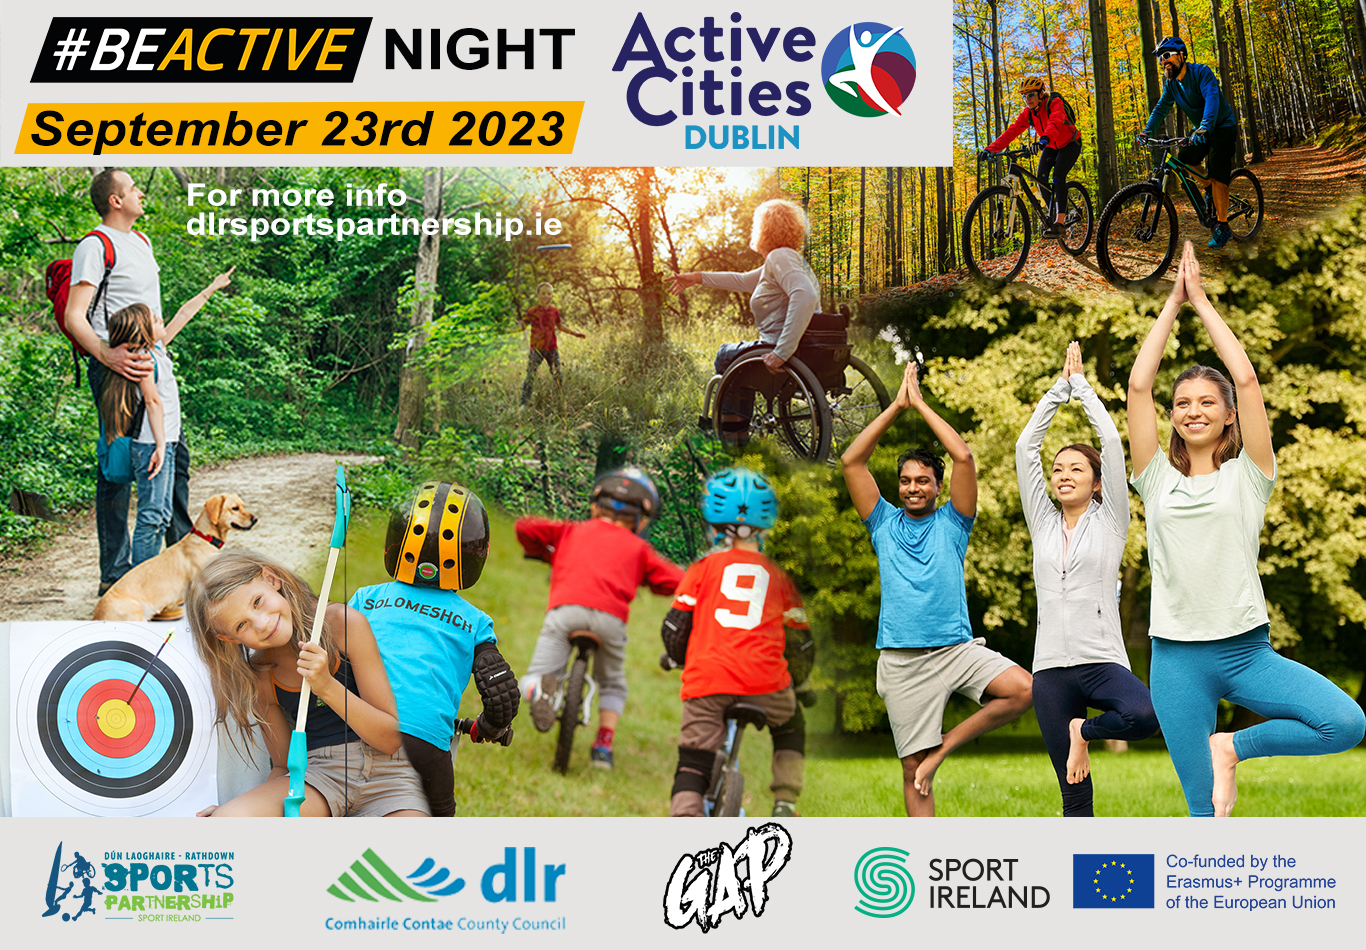 Active Cities Promo poster for Be Active Night